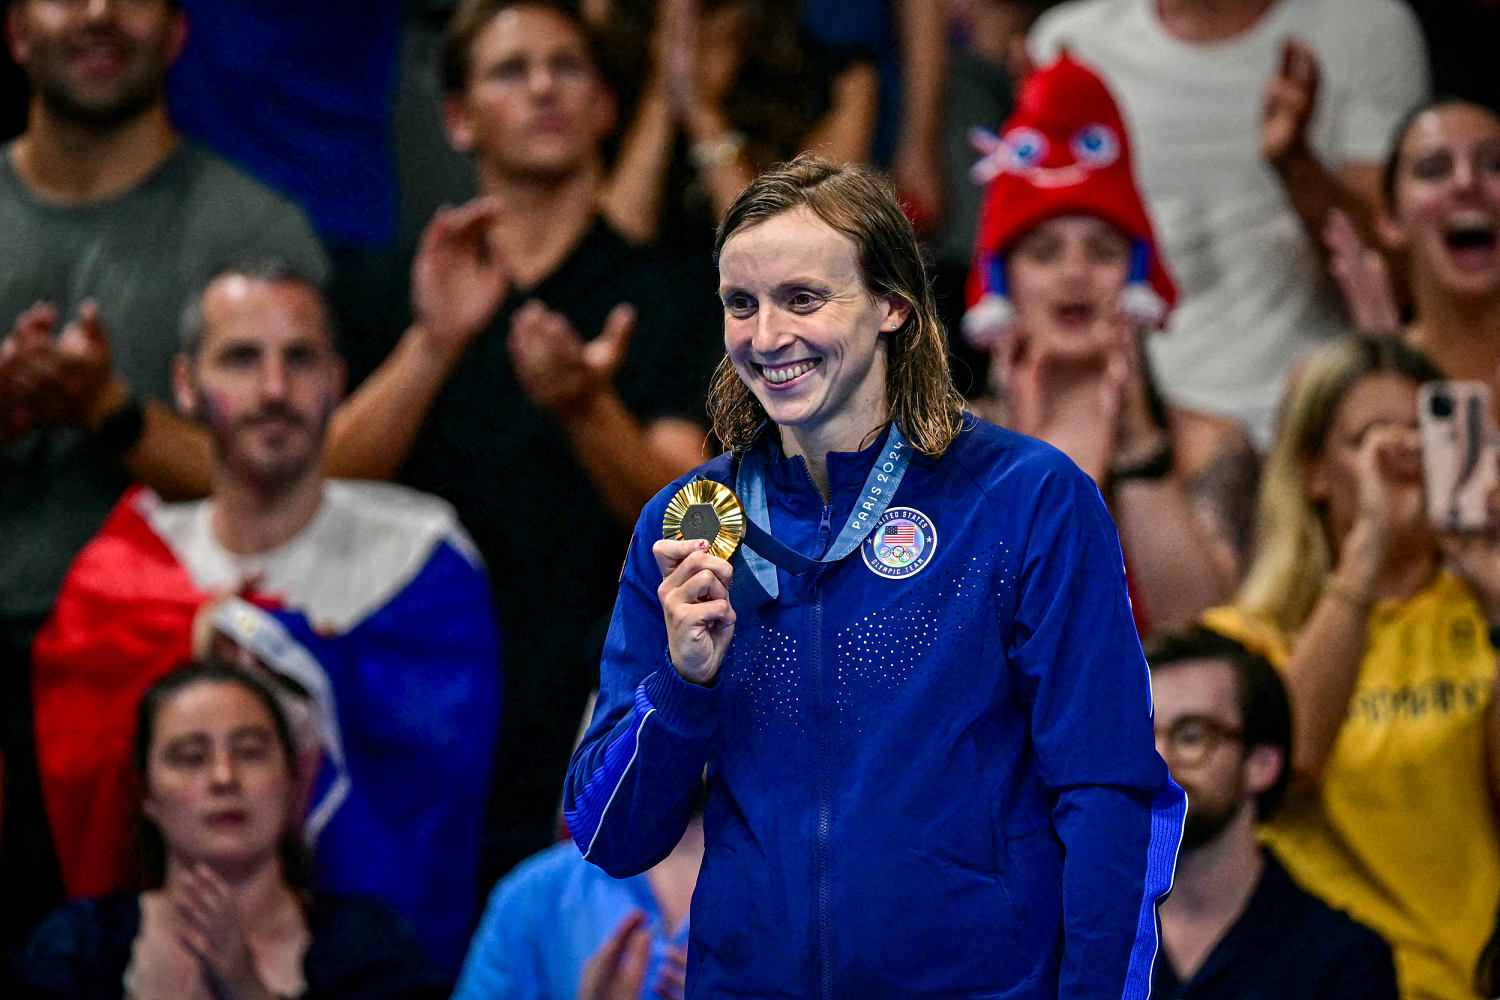 Katie Ledecky wins 9th gold medal, most by American female Olympian